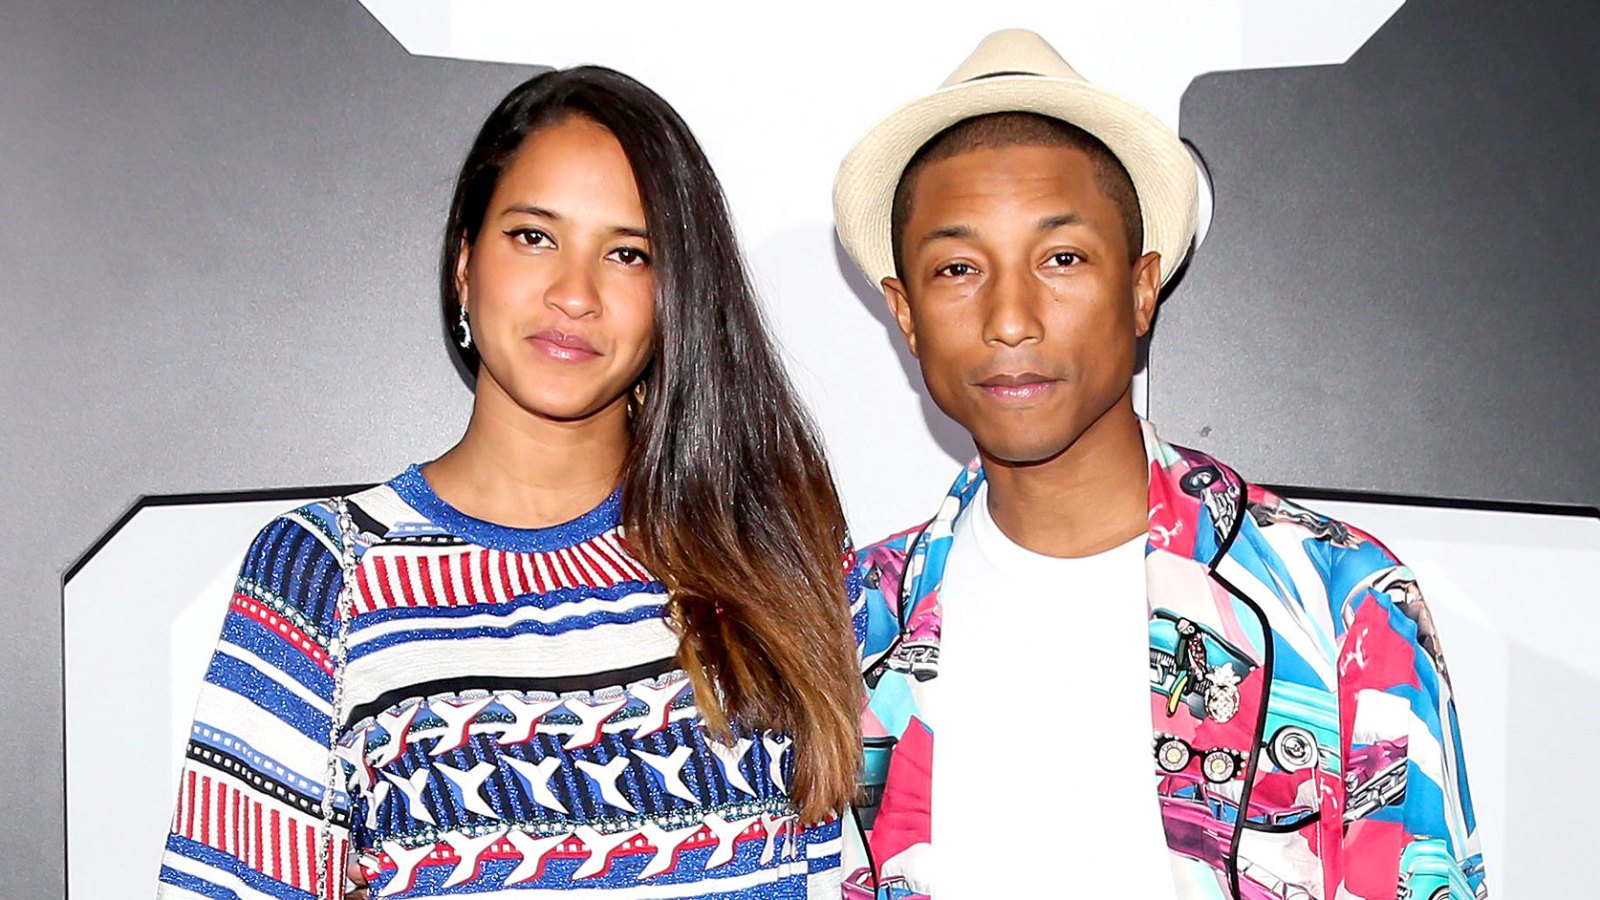 Pharrell Williams And His Wife Helen Lasichanh Have Welcomed